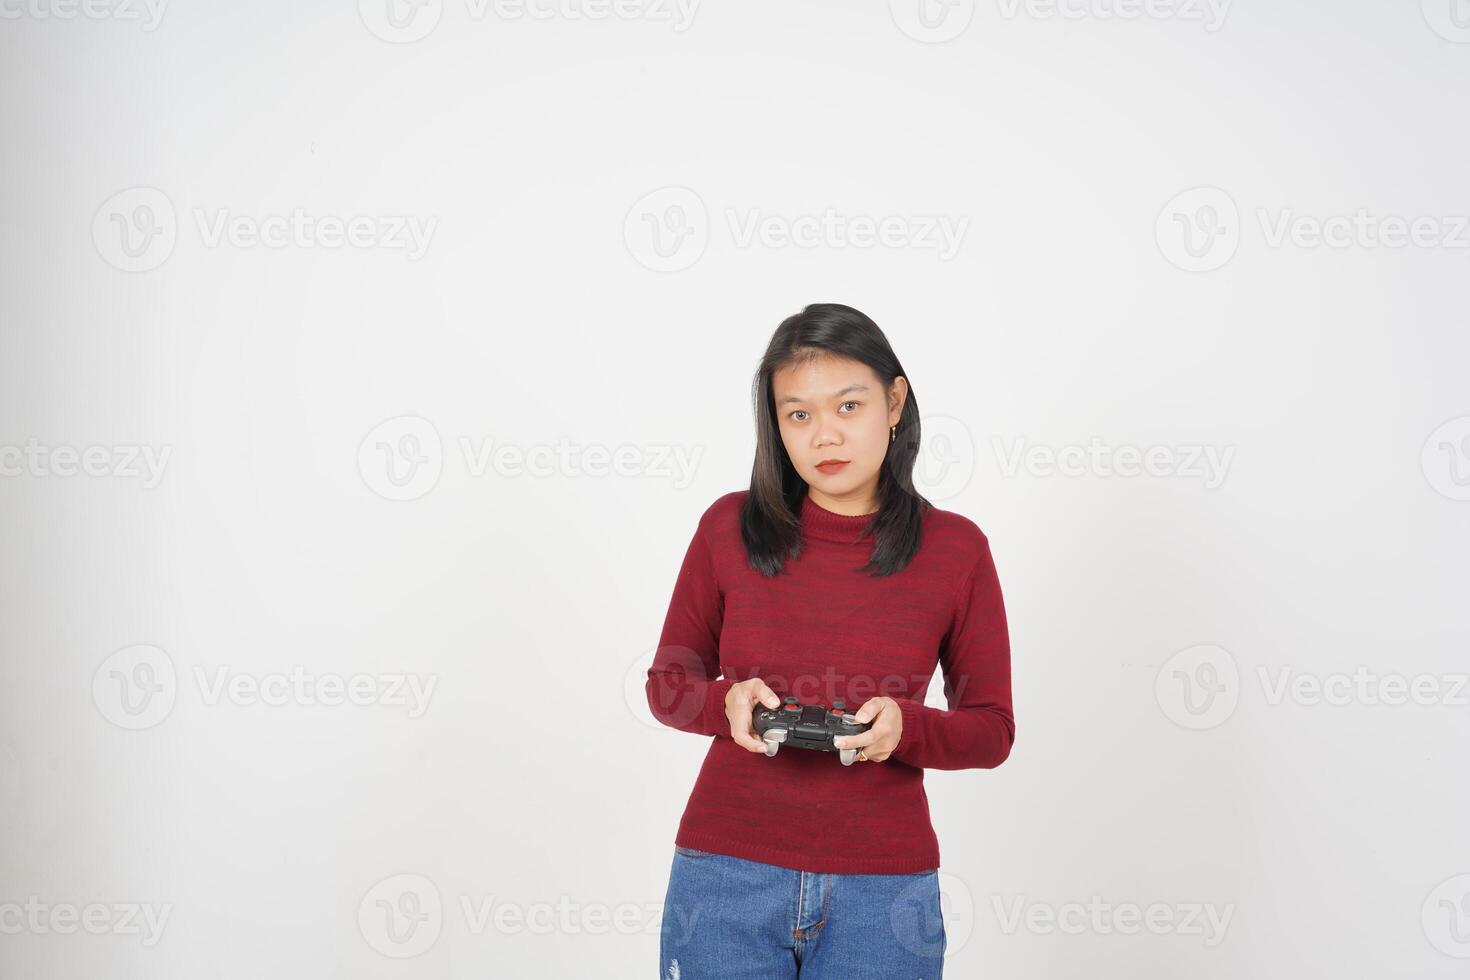 Young Asian woman in Red t-shirt holding game controller, Playing game isolated on white background photo